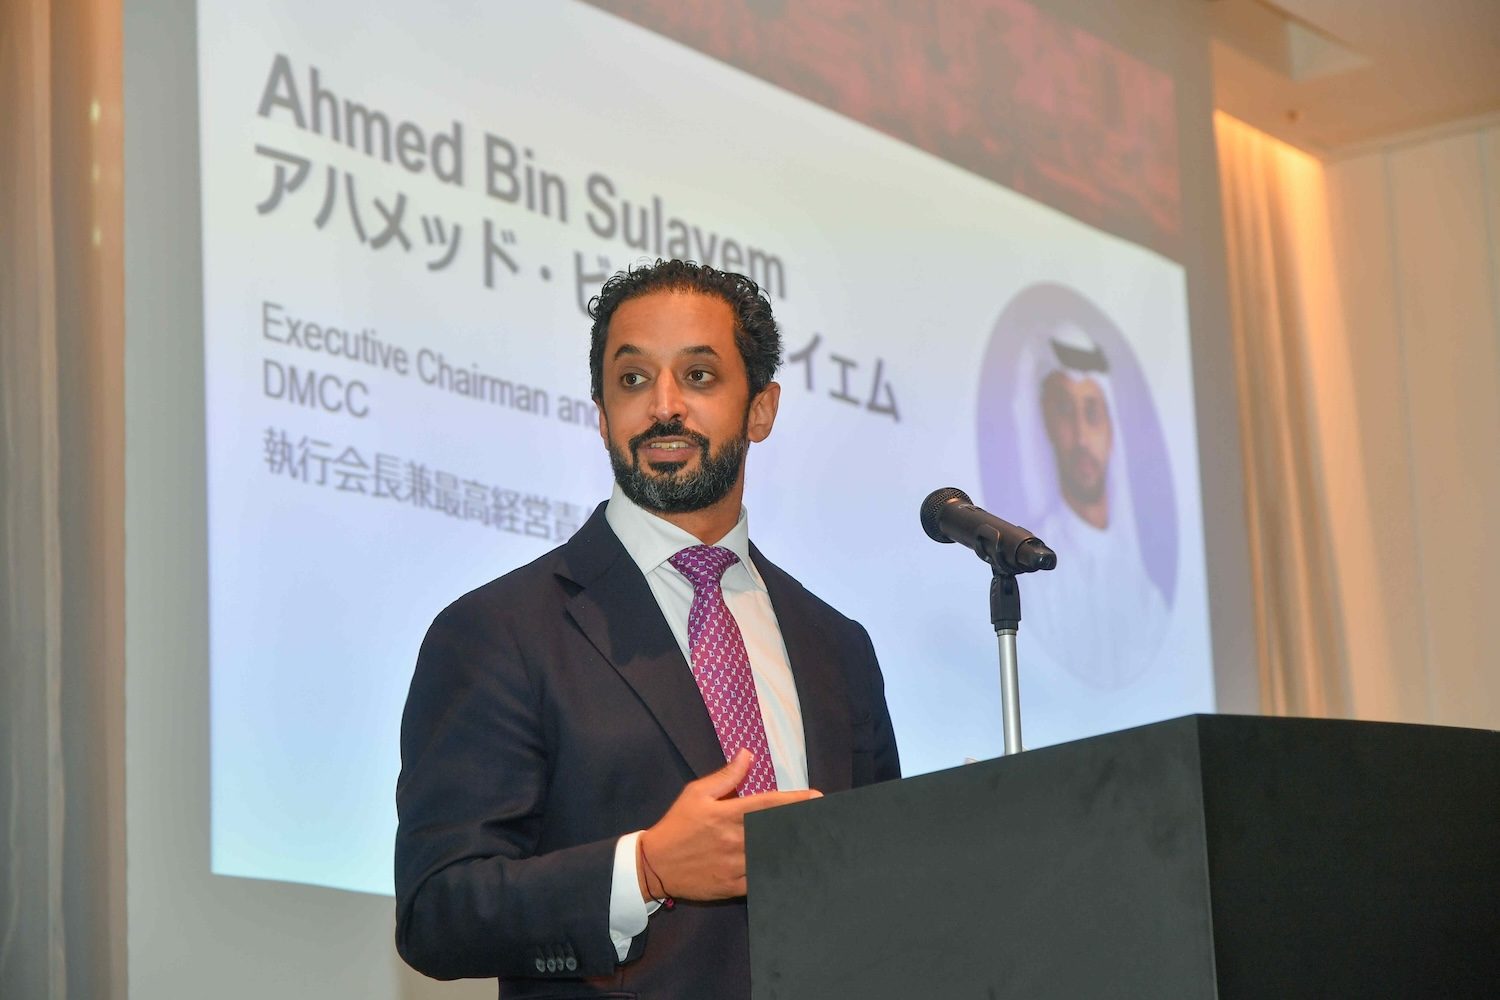 DMCC CEO Ahmed Bin Sulayem says there is 'there is plenty of untapped potential' for UAE trade with Japan